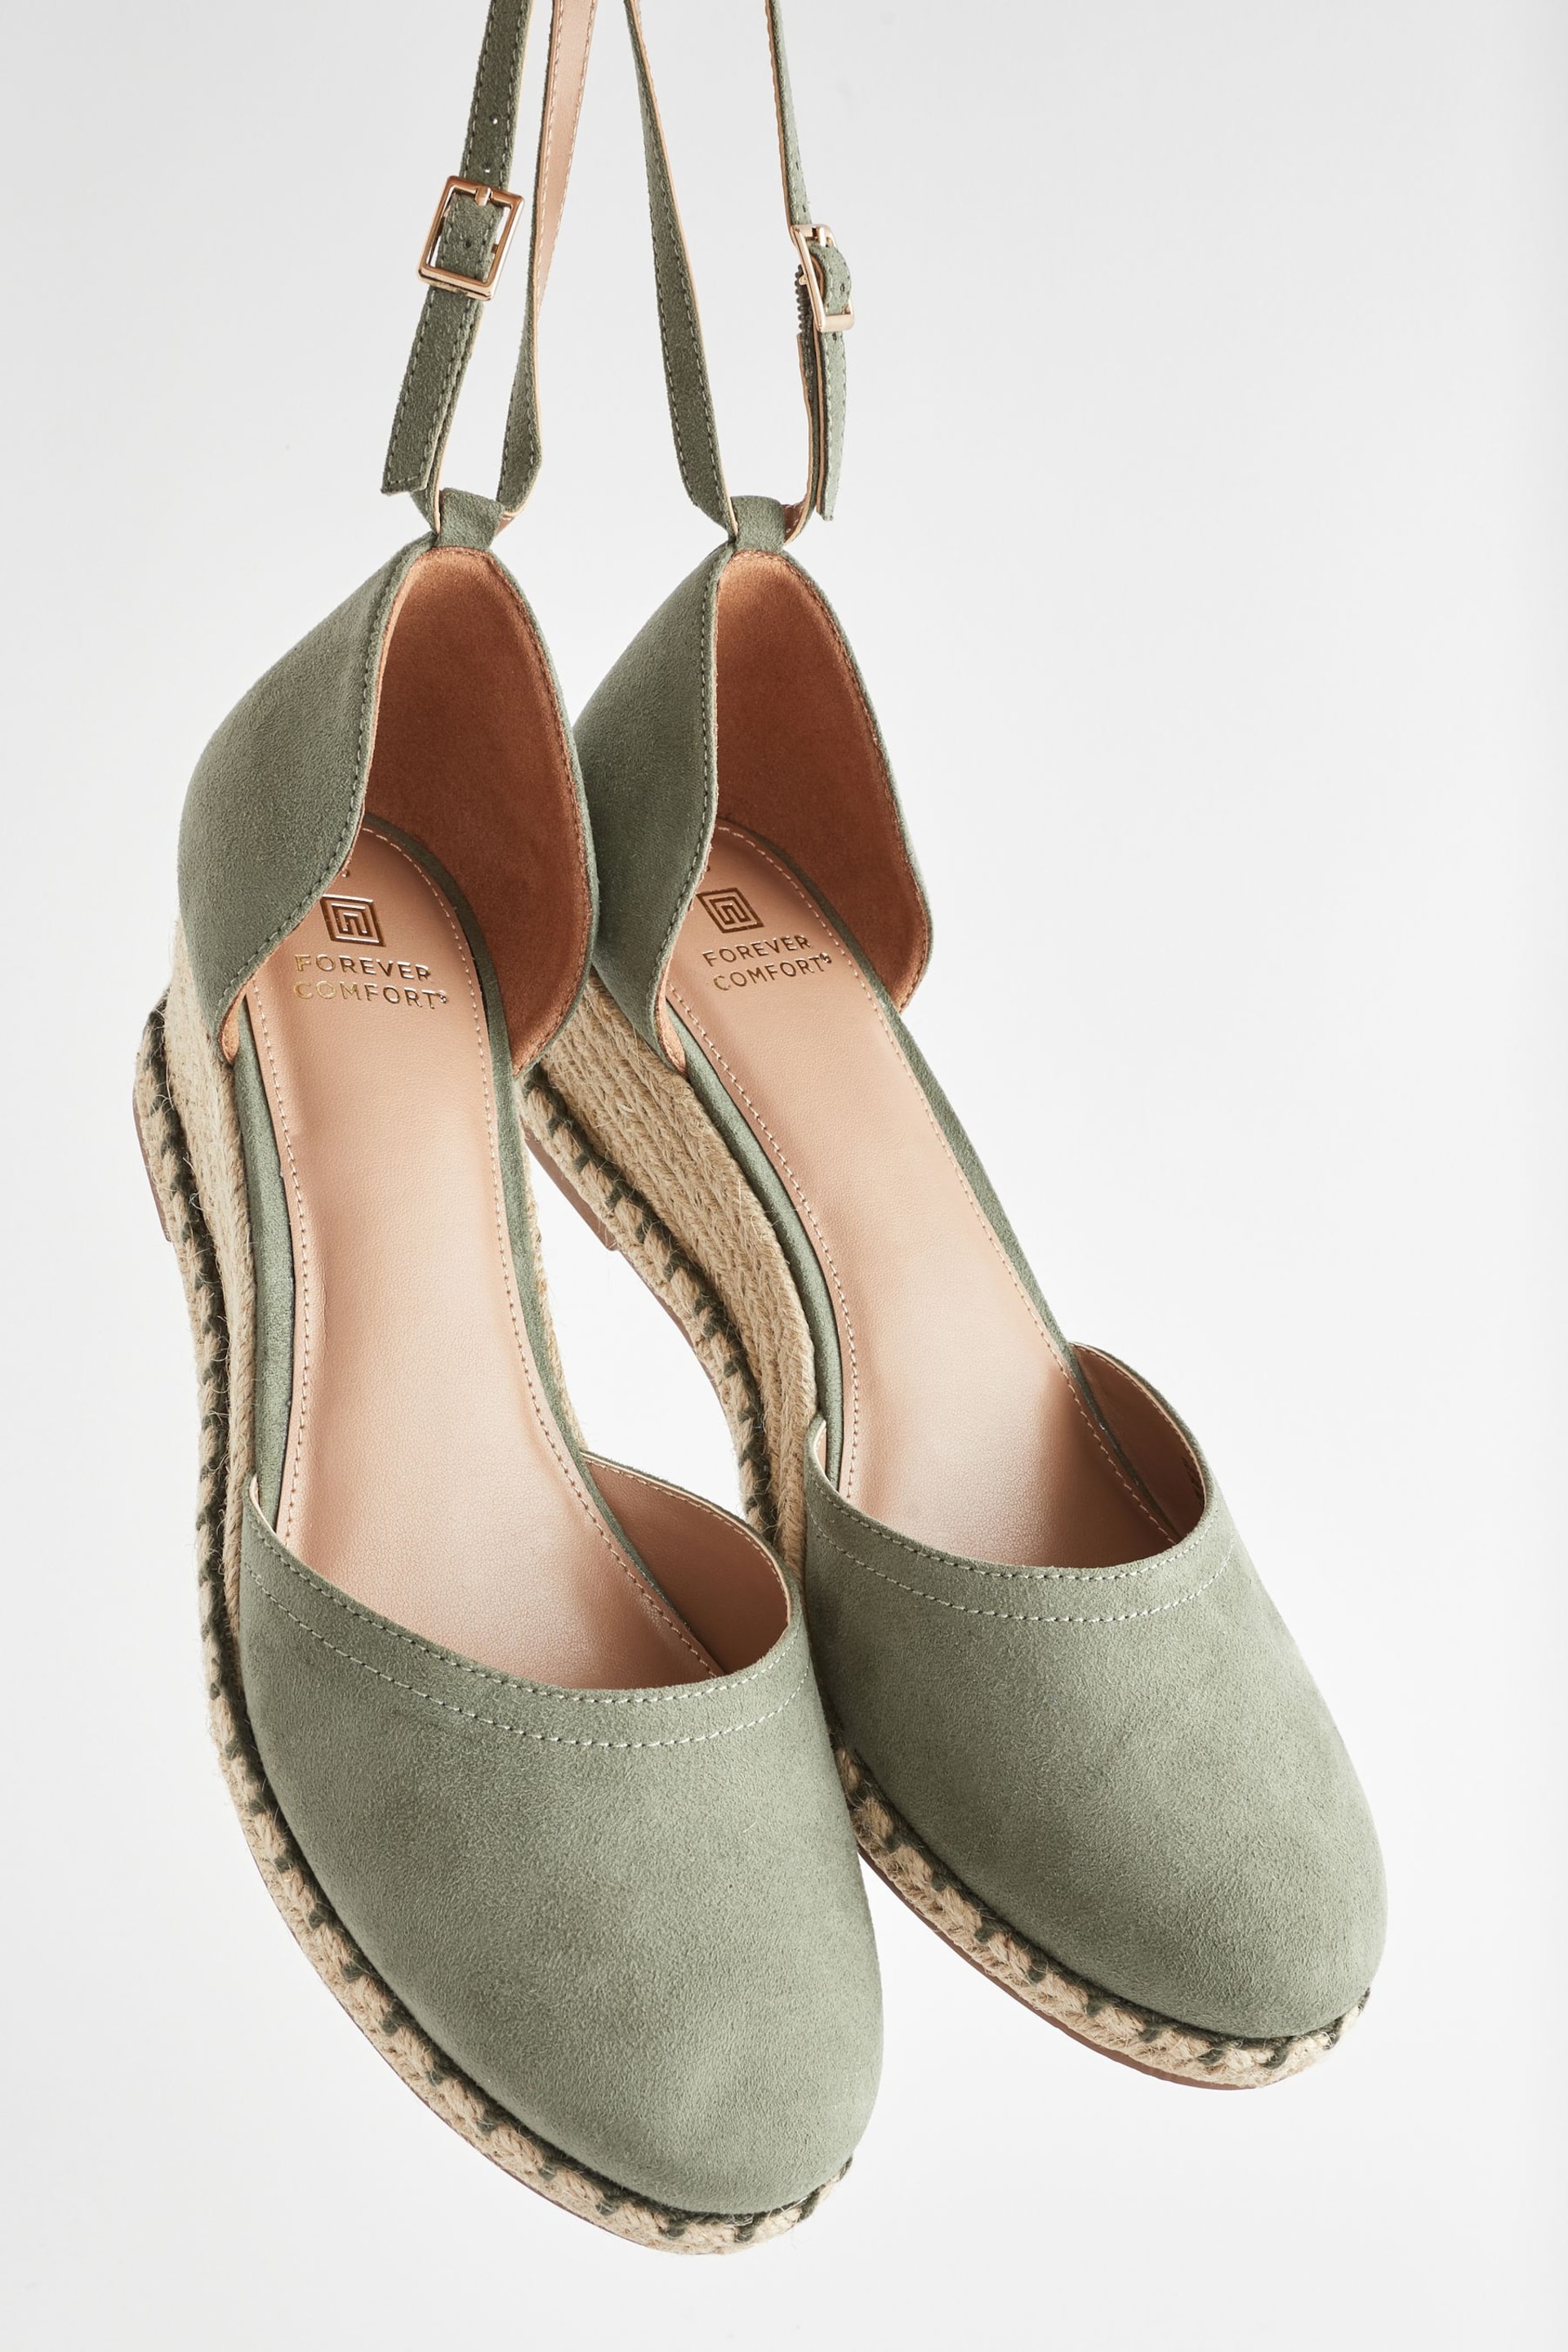 Green Regular/Wide Fit Forever Comfort® Closed Toe Wedges - Image 5 of 9